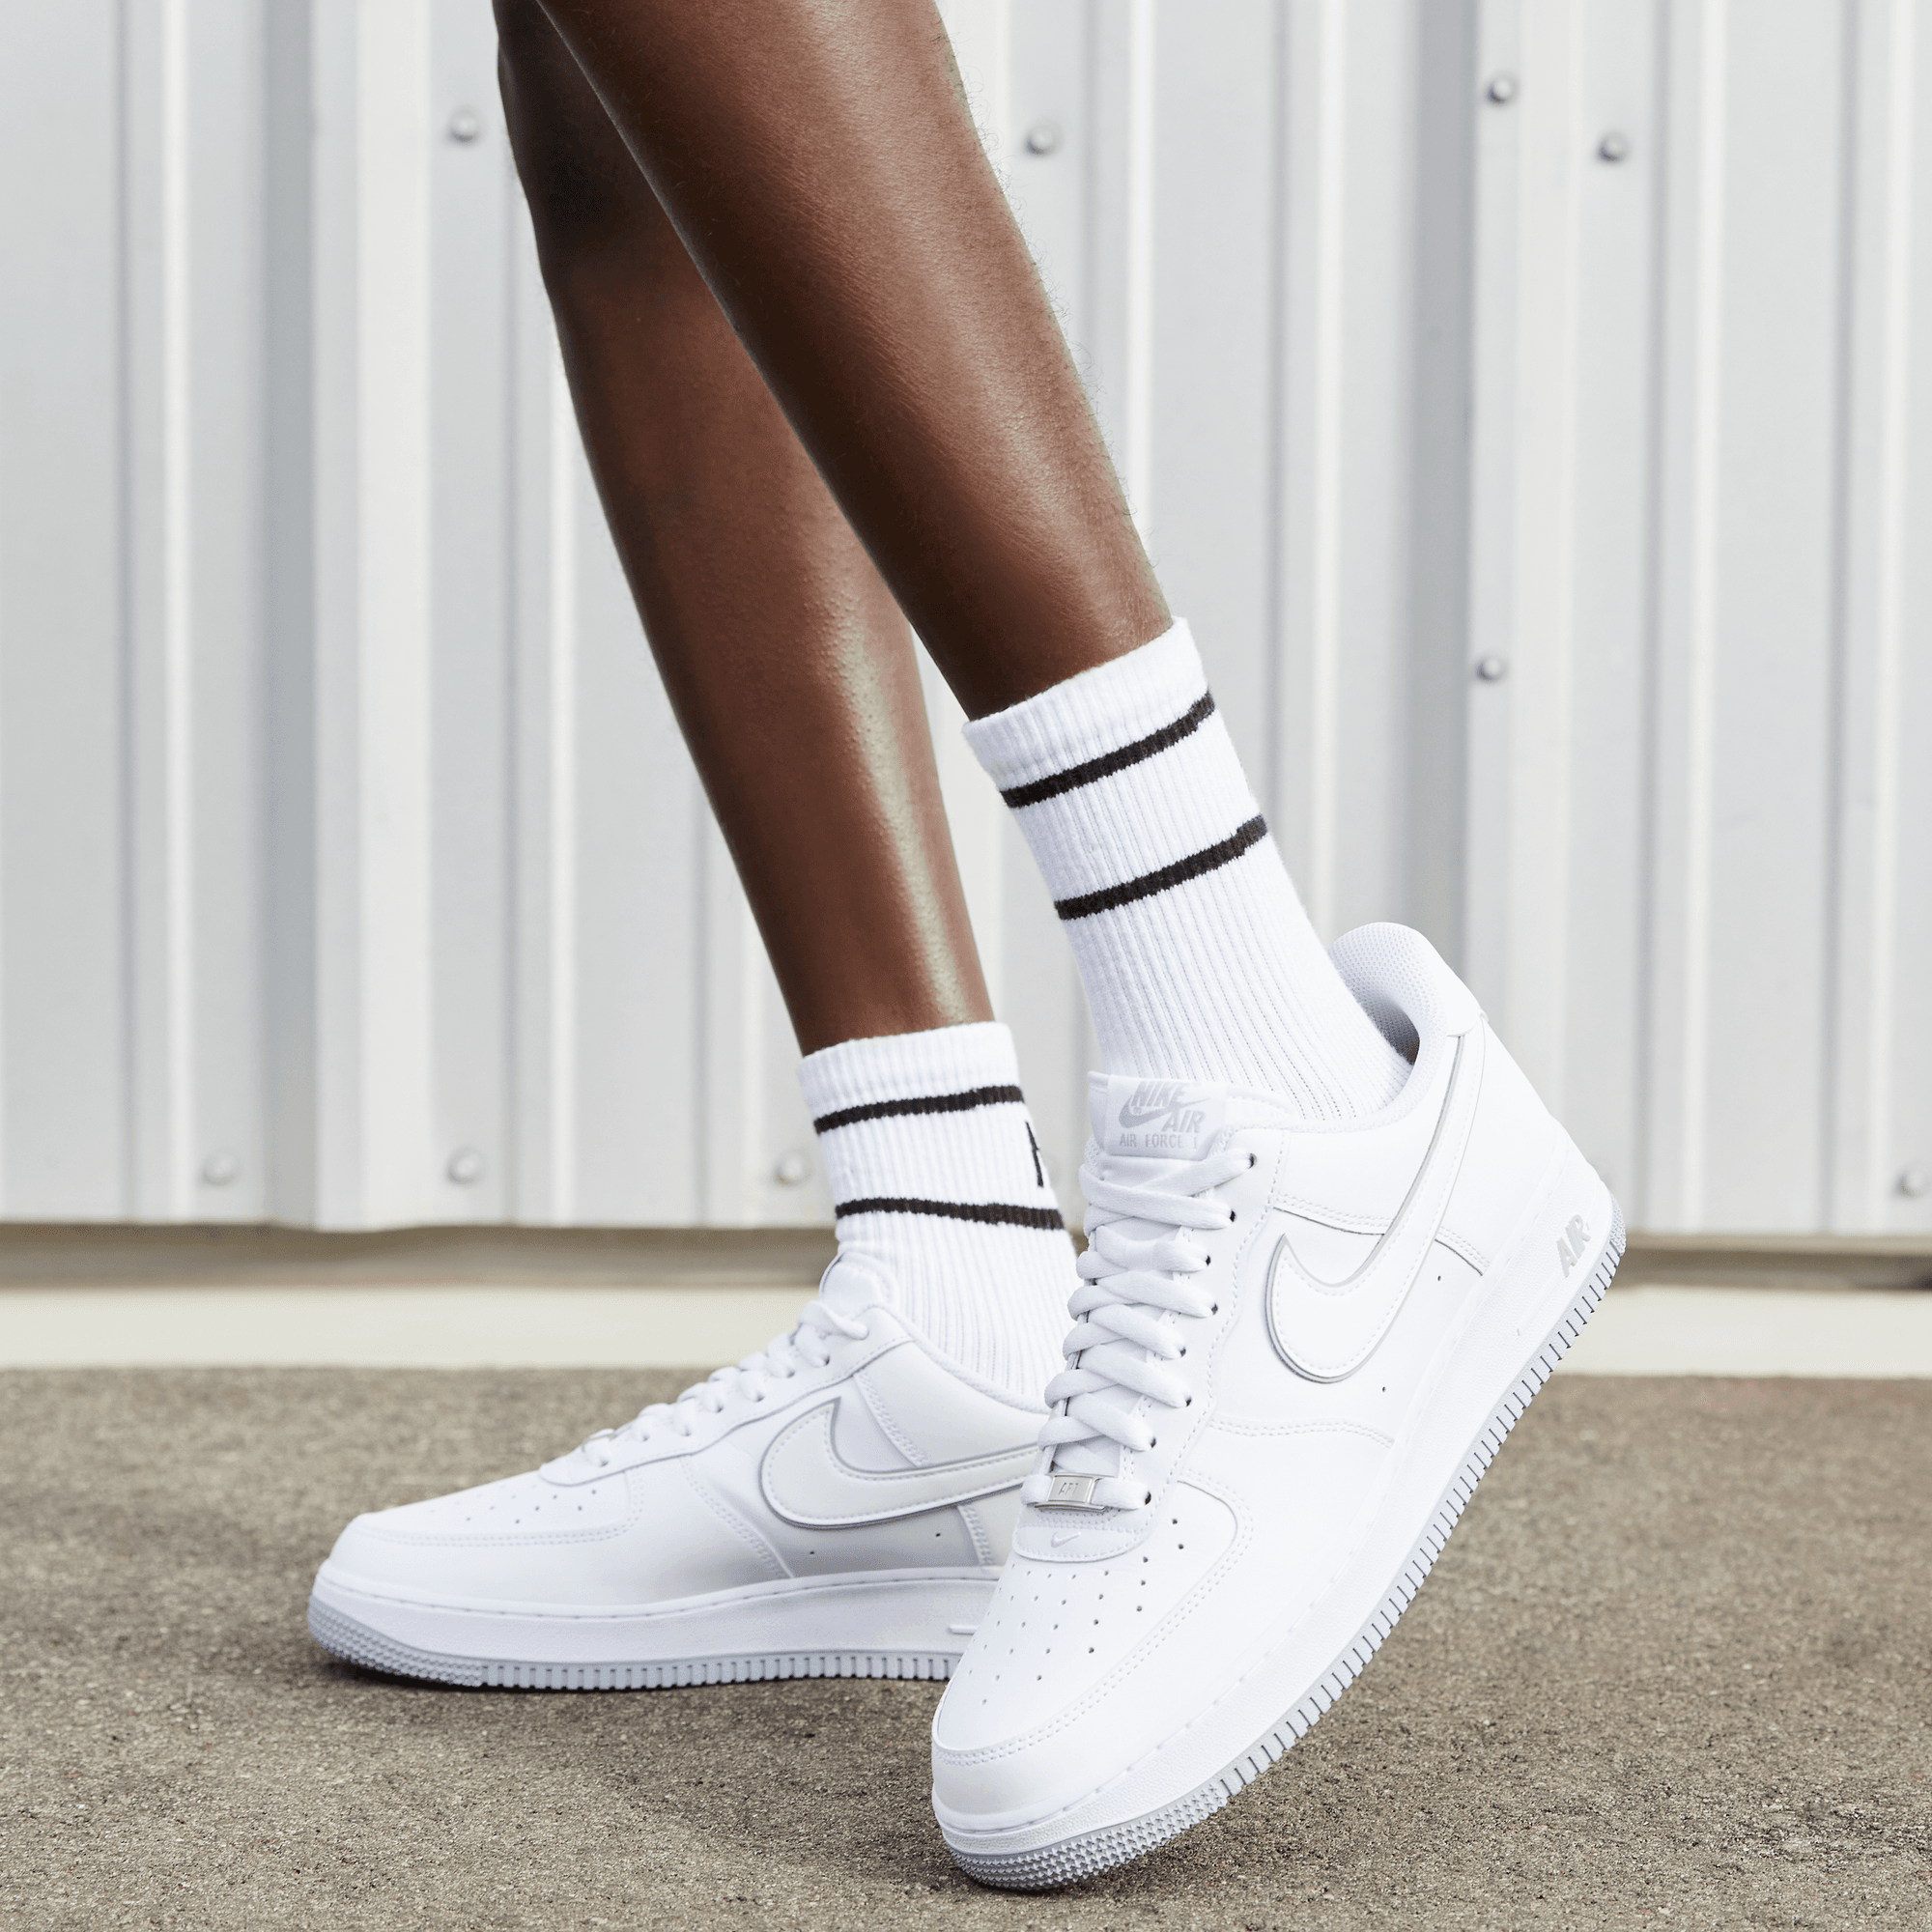 Nike Air Force 1 Mid '07 White/Wolf Grey/White Men's Shoe